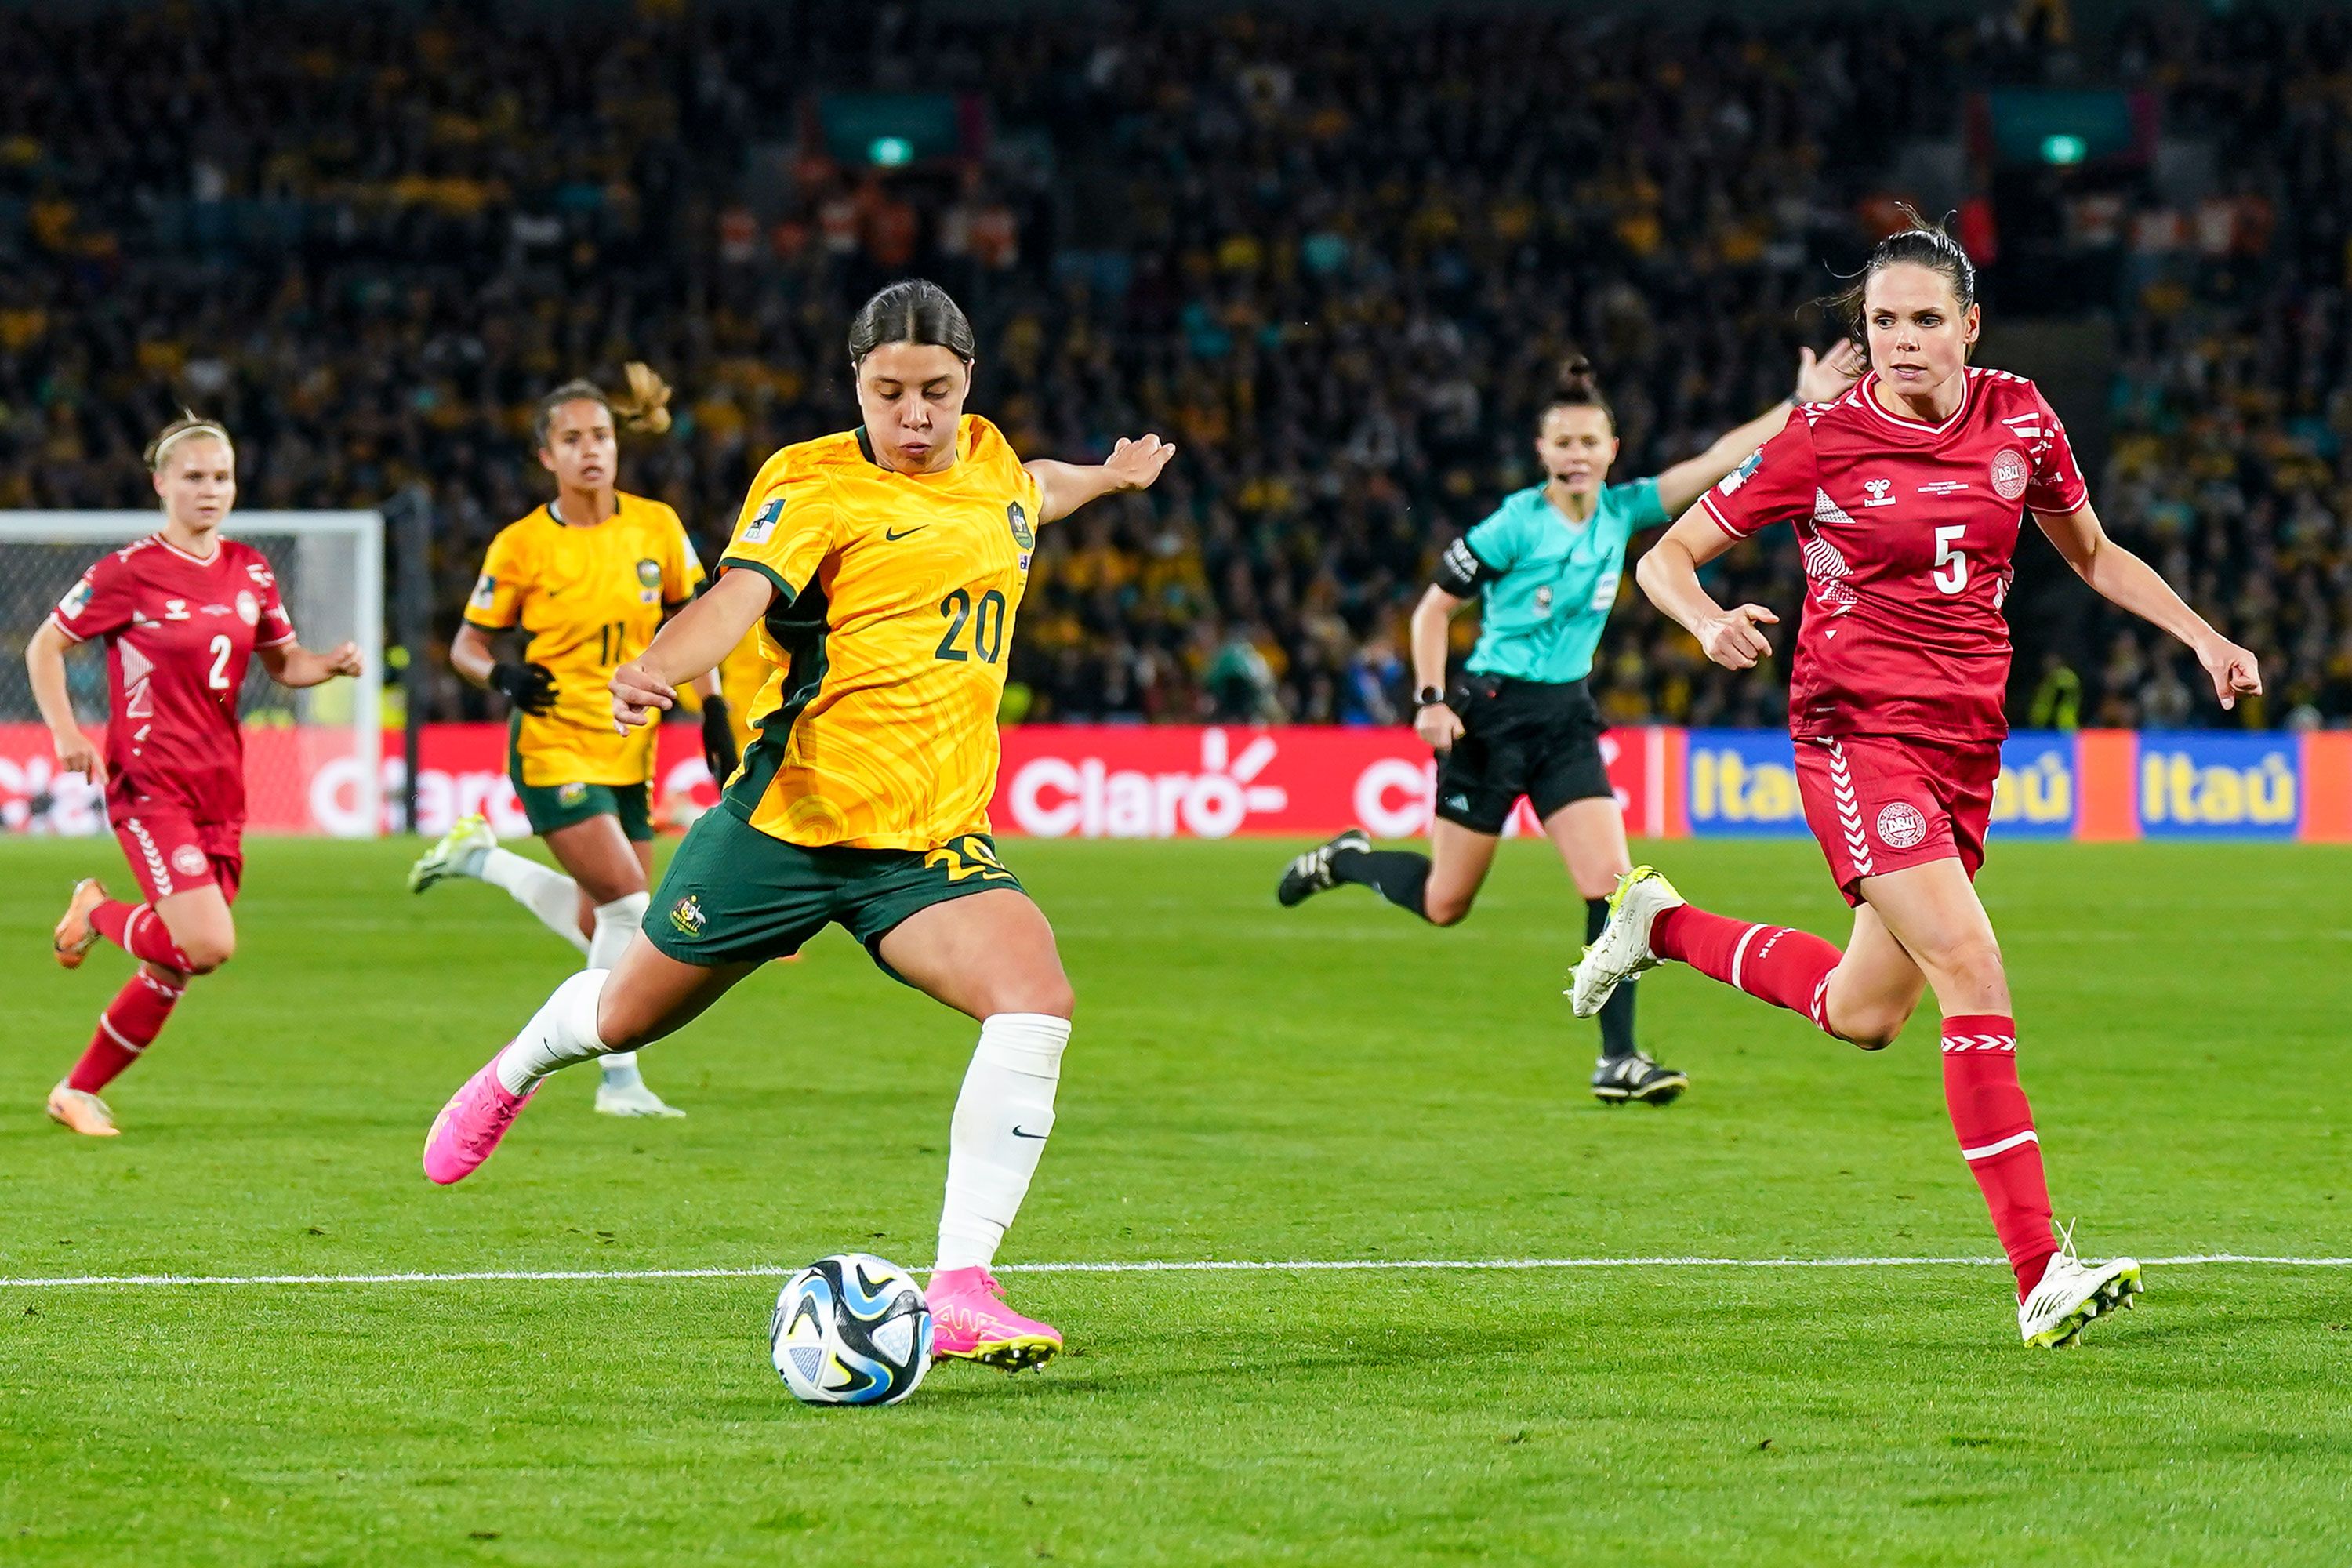 Loved the Matildas at the Women's World Cup? Here are the leagues